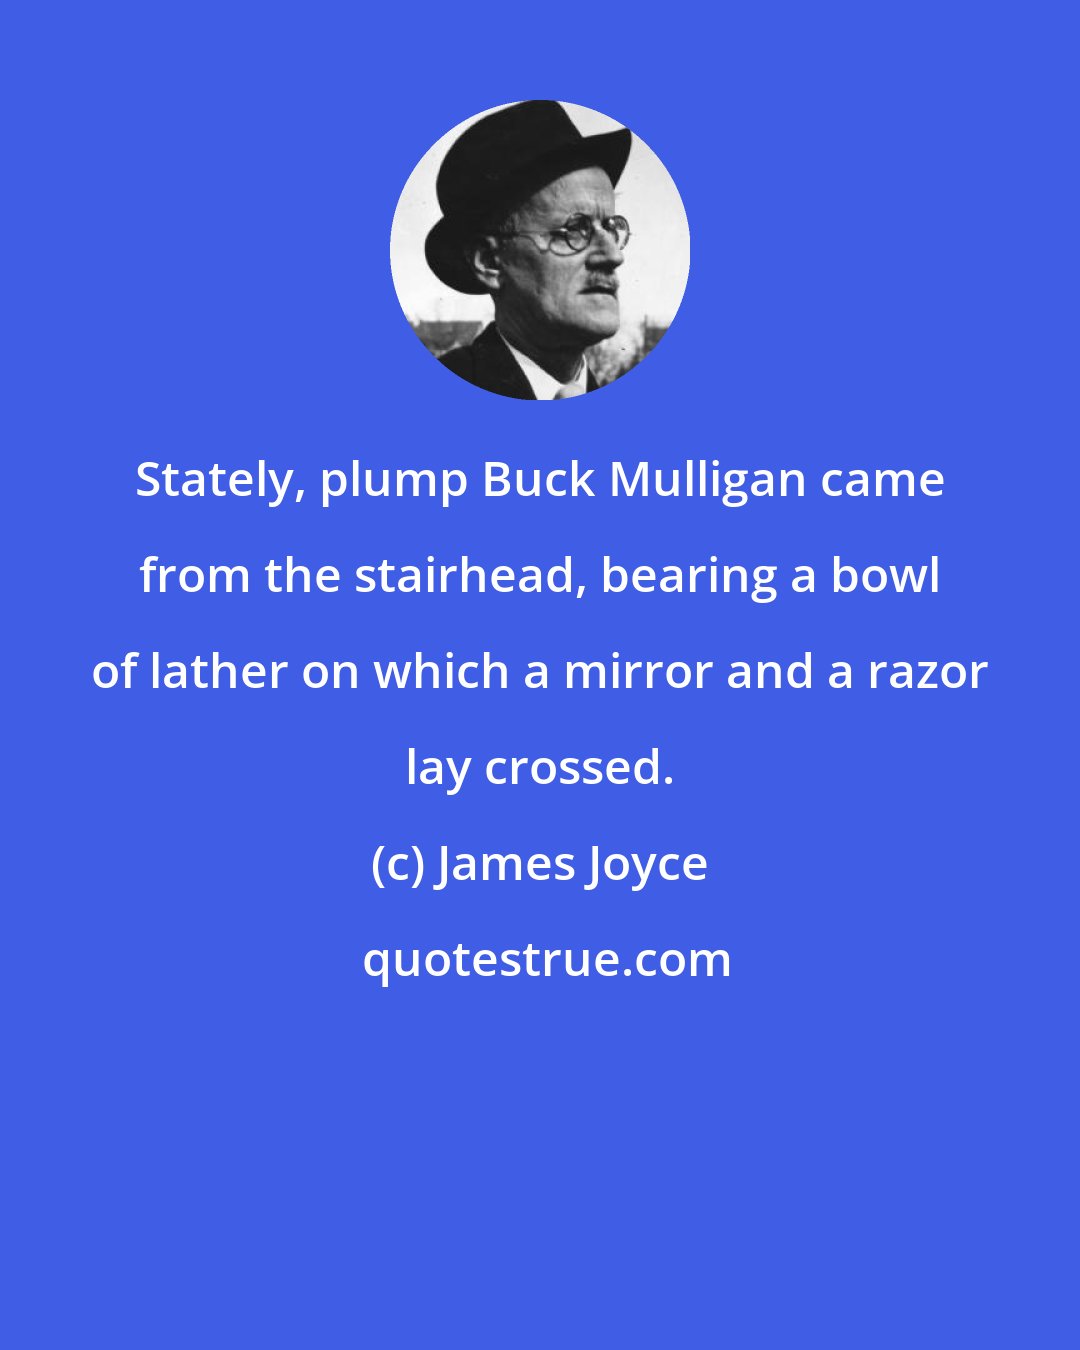 James Joyce: Stately, plump Buck Mulligan came from the stairhead, bearing a bowl of lather on which a mirror and a razor lay crossed.